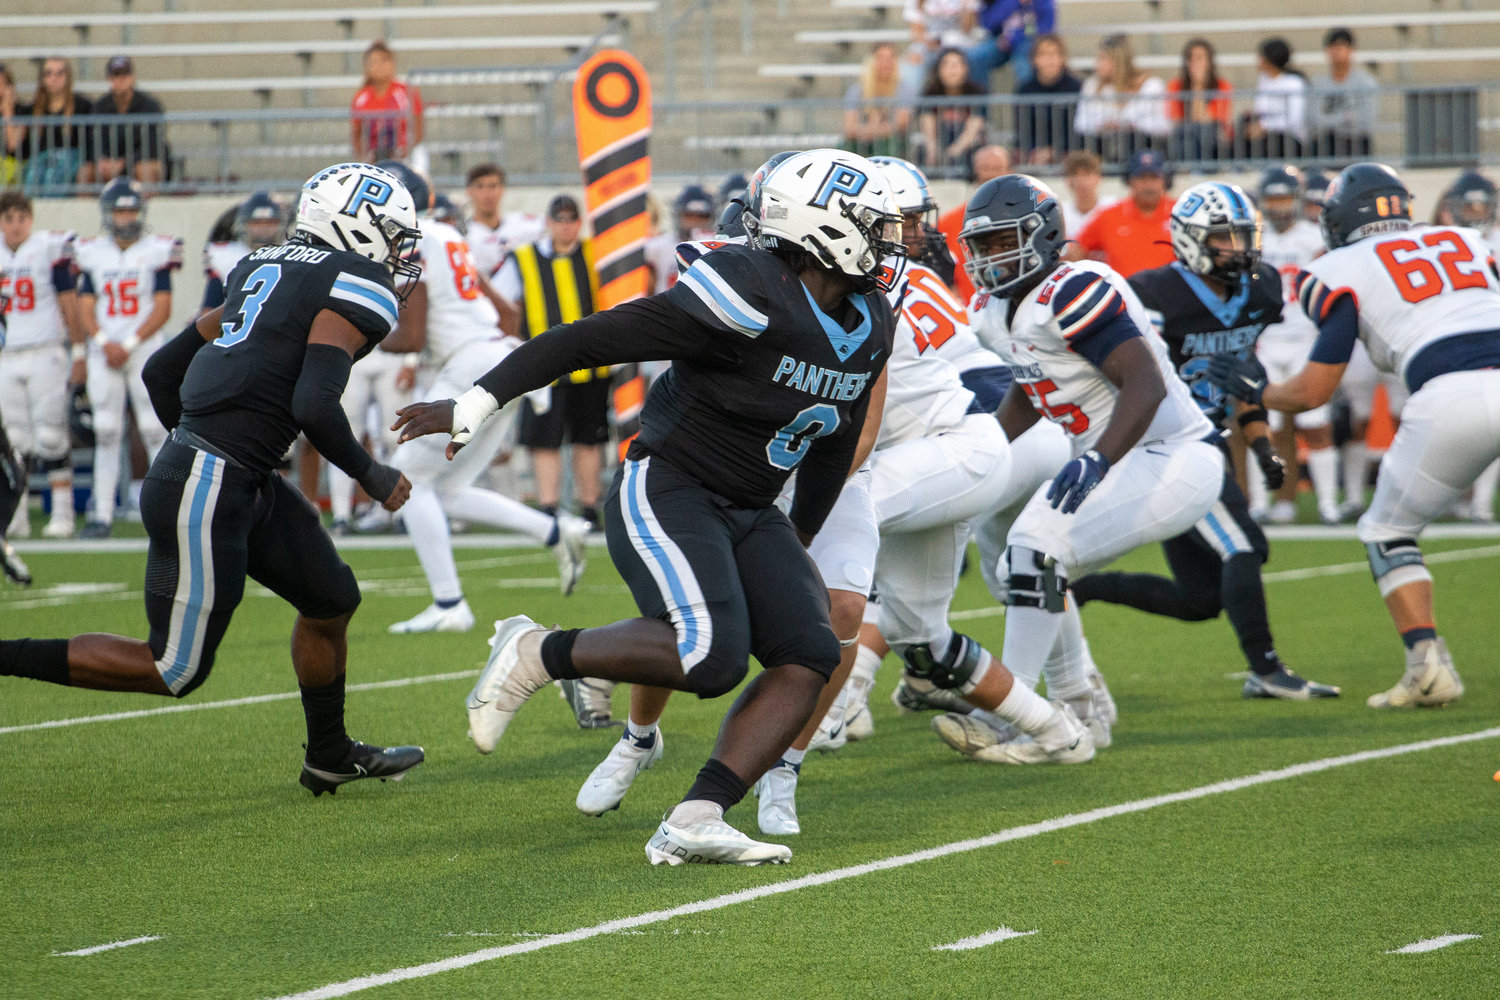 Paetow's D.J. Hicks fights through a blocker during a game between Paetow and Seven Lakes at Legacy Stadium.